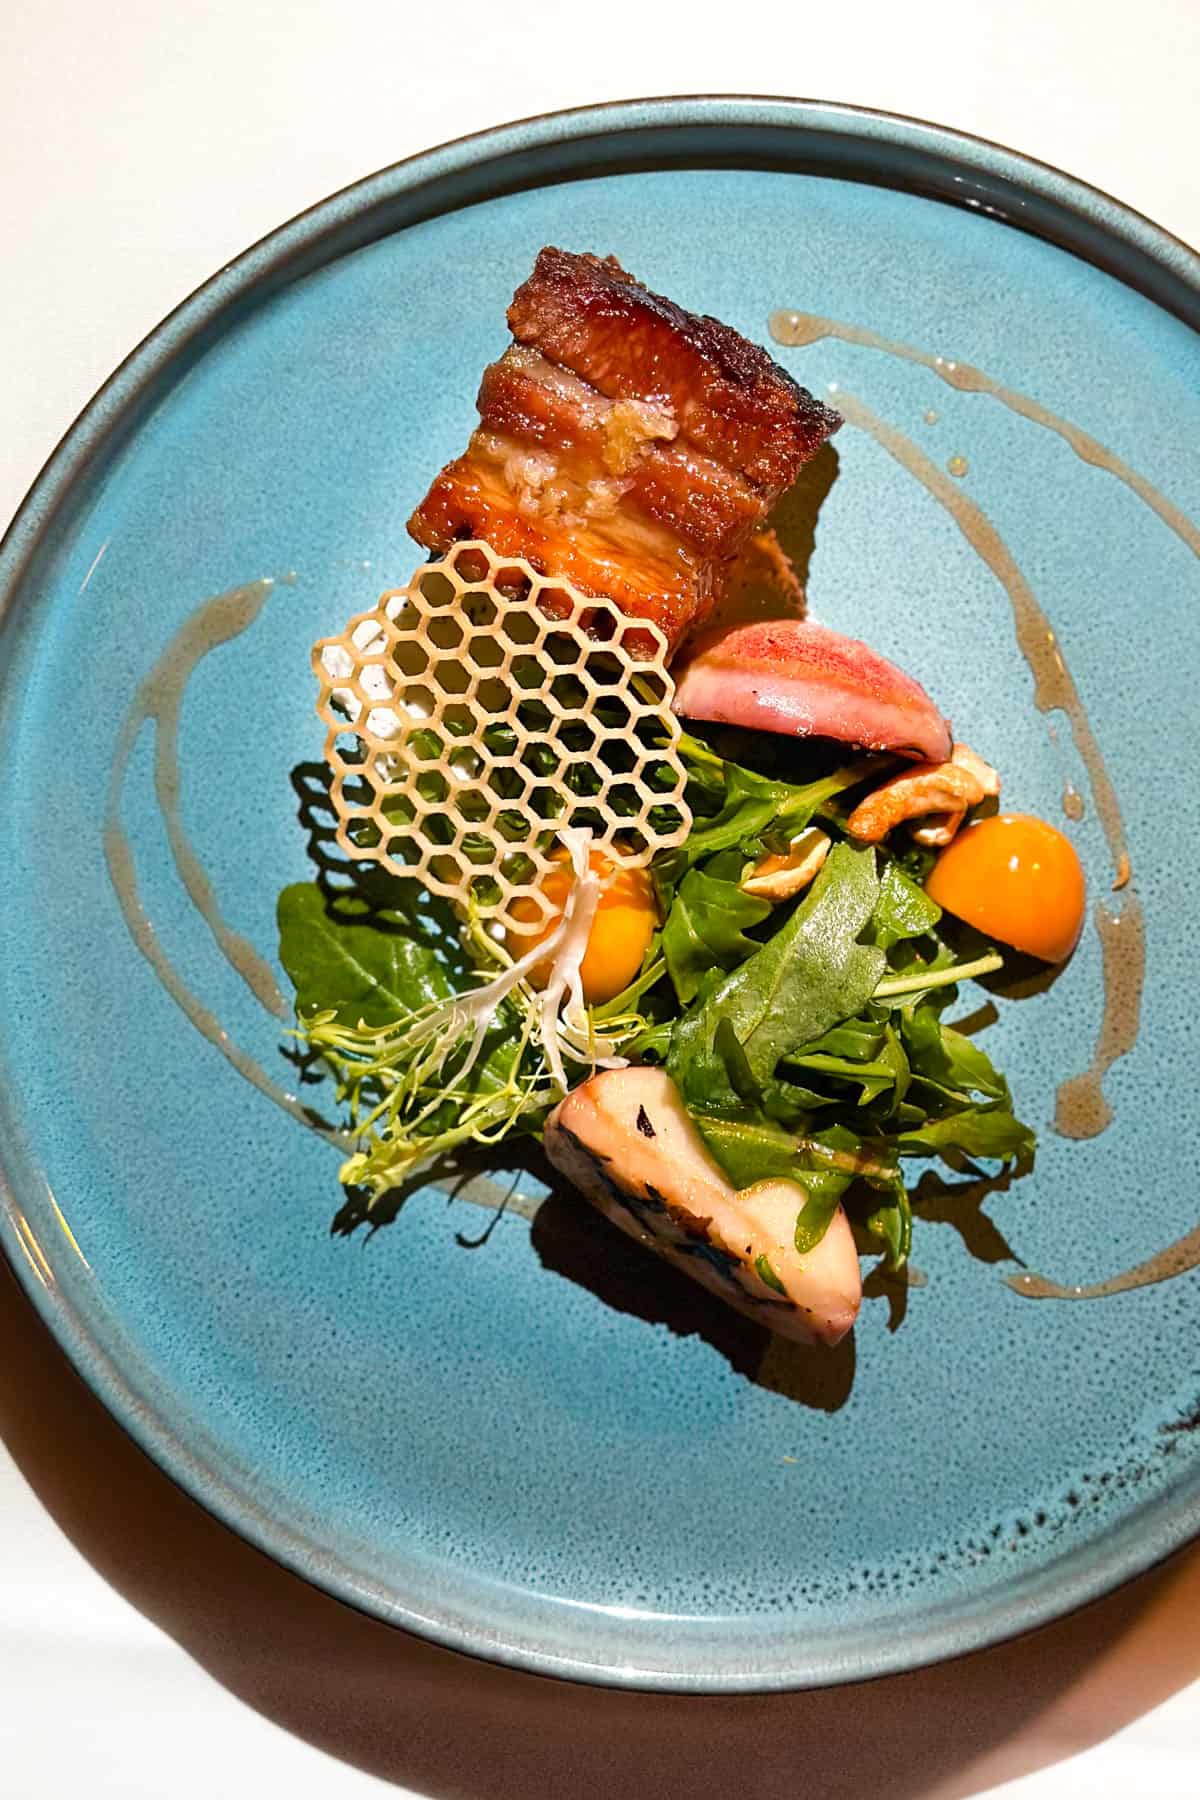 Pork Belly with Arugula, Grilled Peaches, Cashews, Goat Cheese, and Honeycomb (second course) - on a blue plate at Cafe Monarch in Scottsdale, AZ.